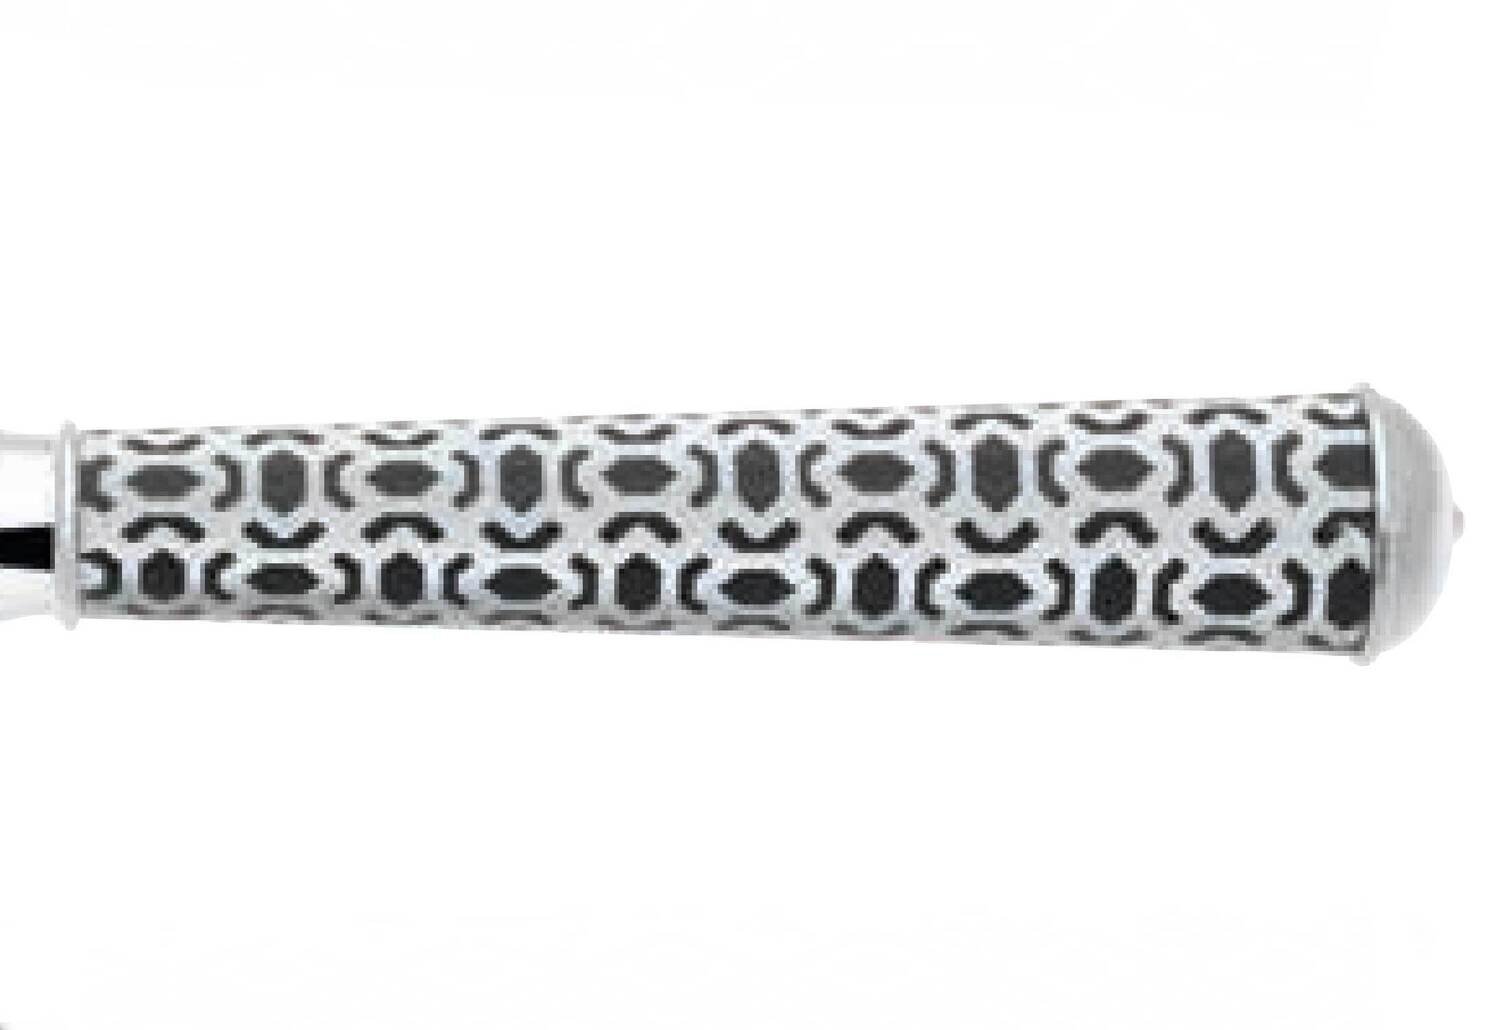 Ercuis Mosaique Grey Individual Butter Knife 5.125 Inch Silver Plated Part Golded F602535-27